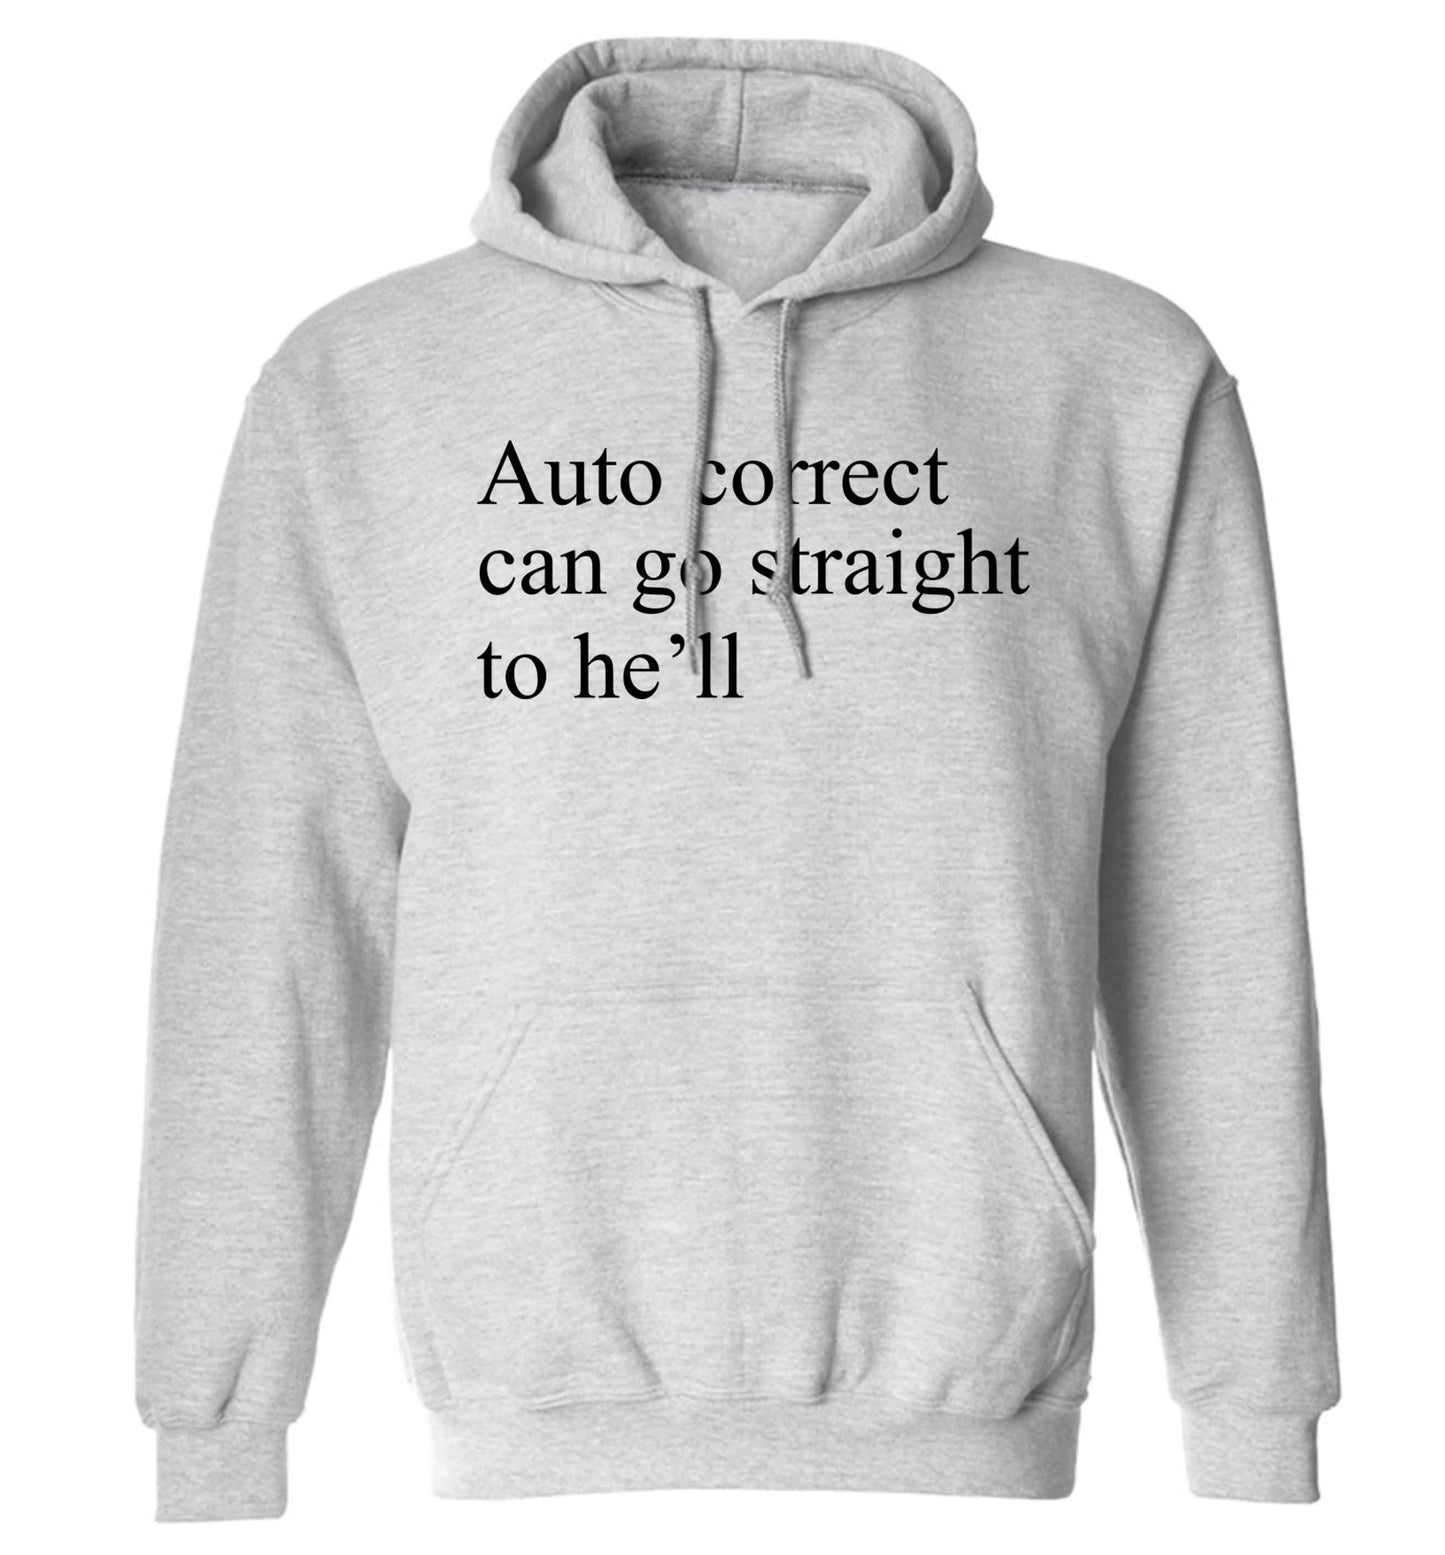 Auto correct can go straight to he'll adults unisex grey hoodie 2XL